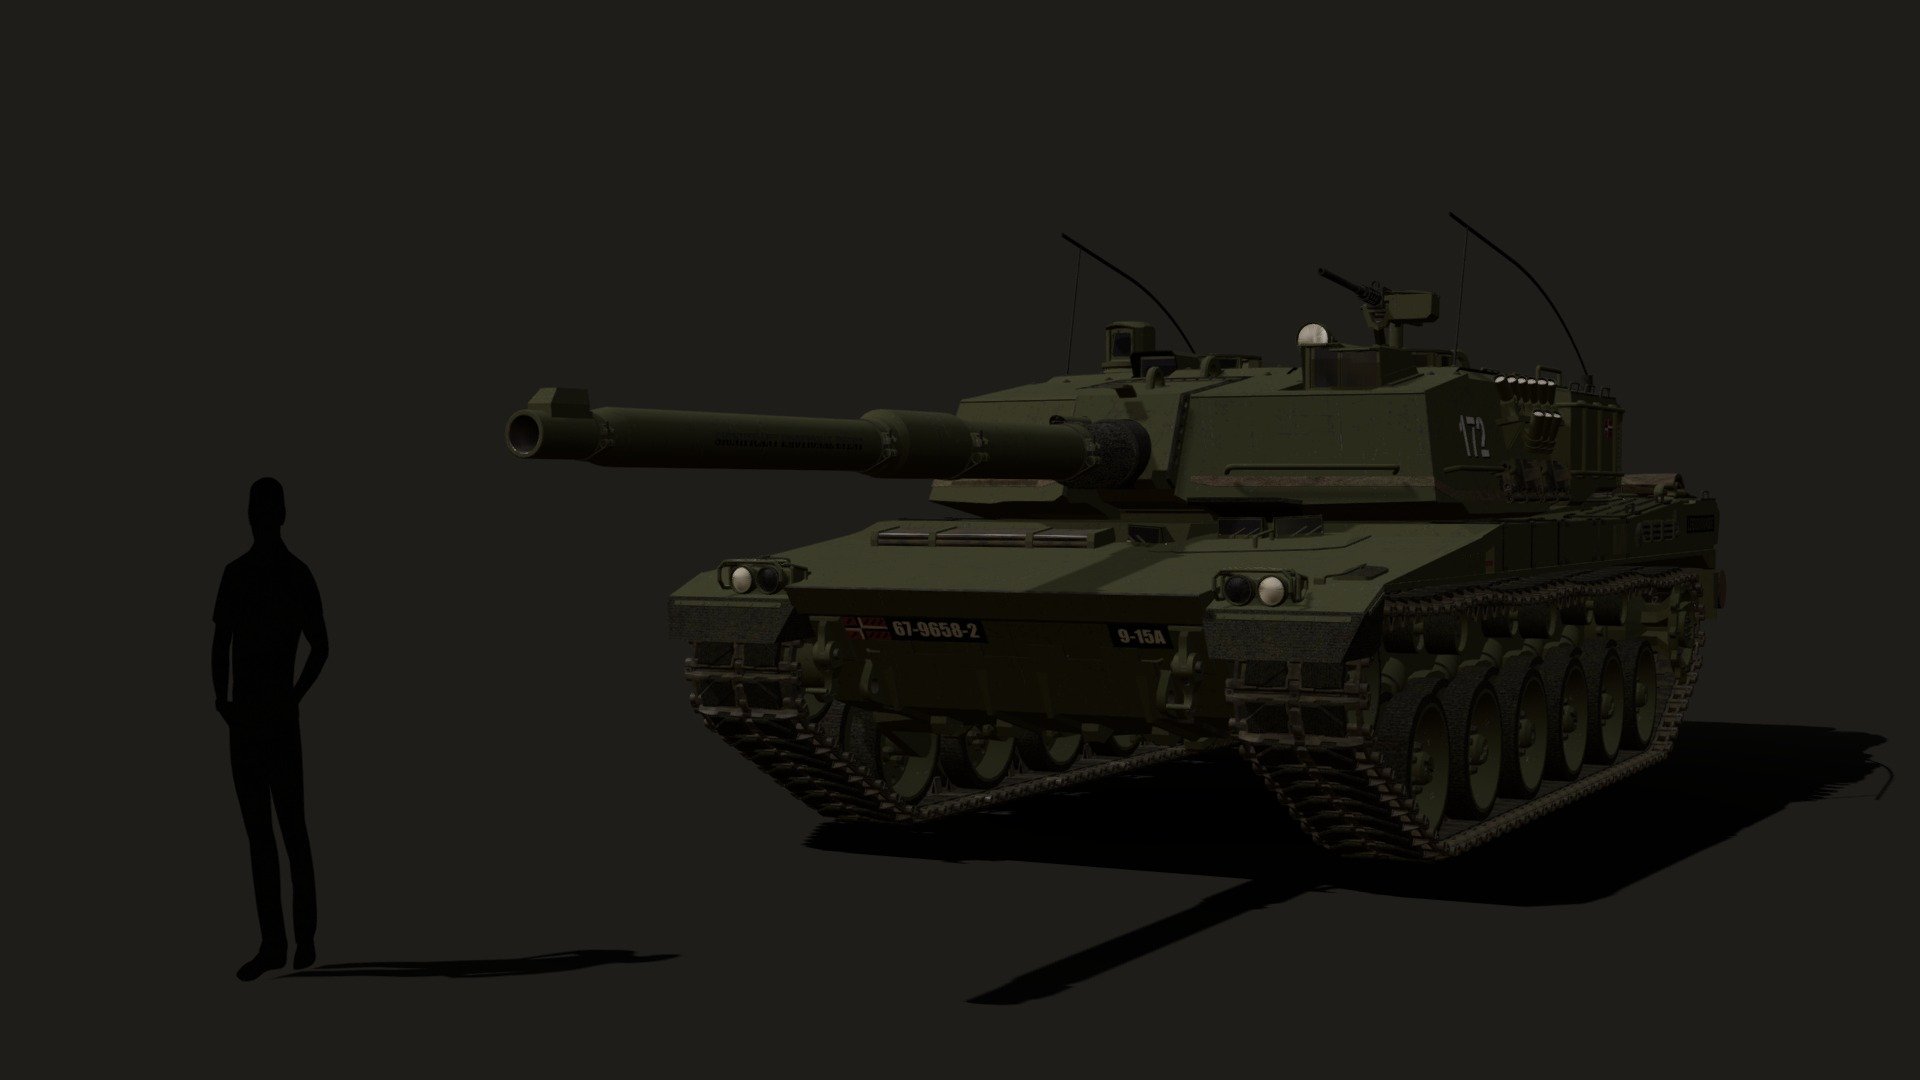 This is an updated version of my fictional tank model, Legionnaire. This is the Mk. 1 version, and would date to around a 1984 introduction based on the technologies/features present in the design.

There are further versions that go up to Mk. 4, and include features of tanks from the wars/designs of the early 2000s, but those aren't finalized yet. This Mk. 1 version is the only Mk. that I'm currently satisfied with publishing, as most initial production versions of tanks are relatively bare-bones anyways 3d model